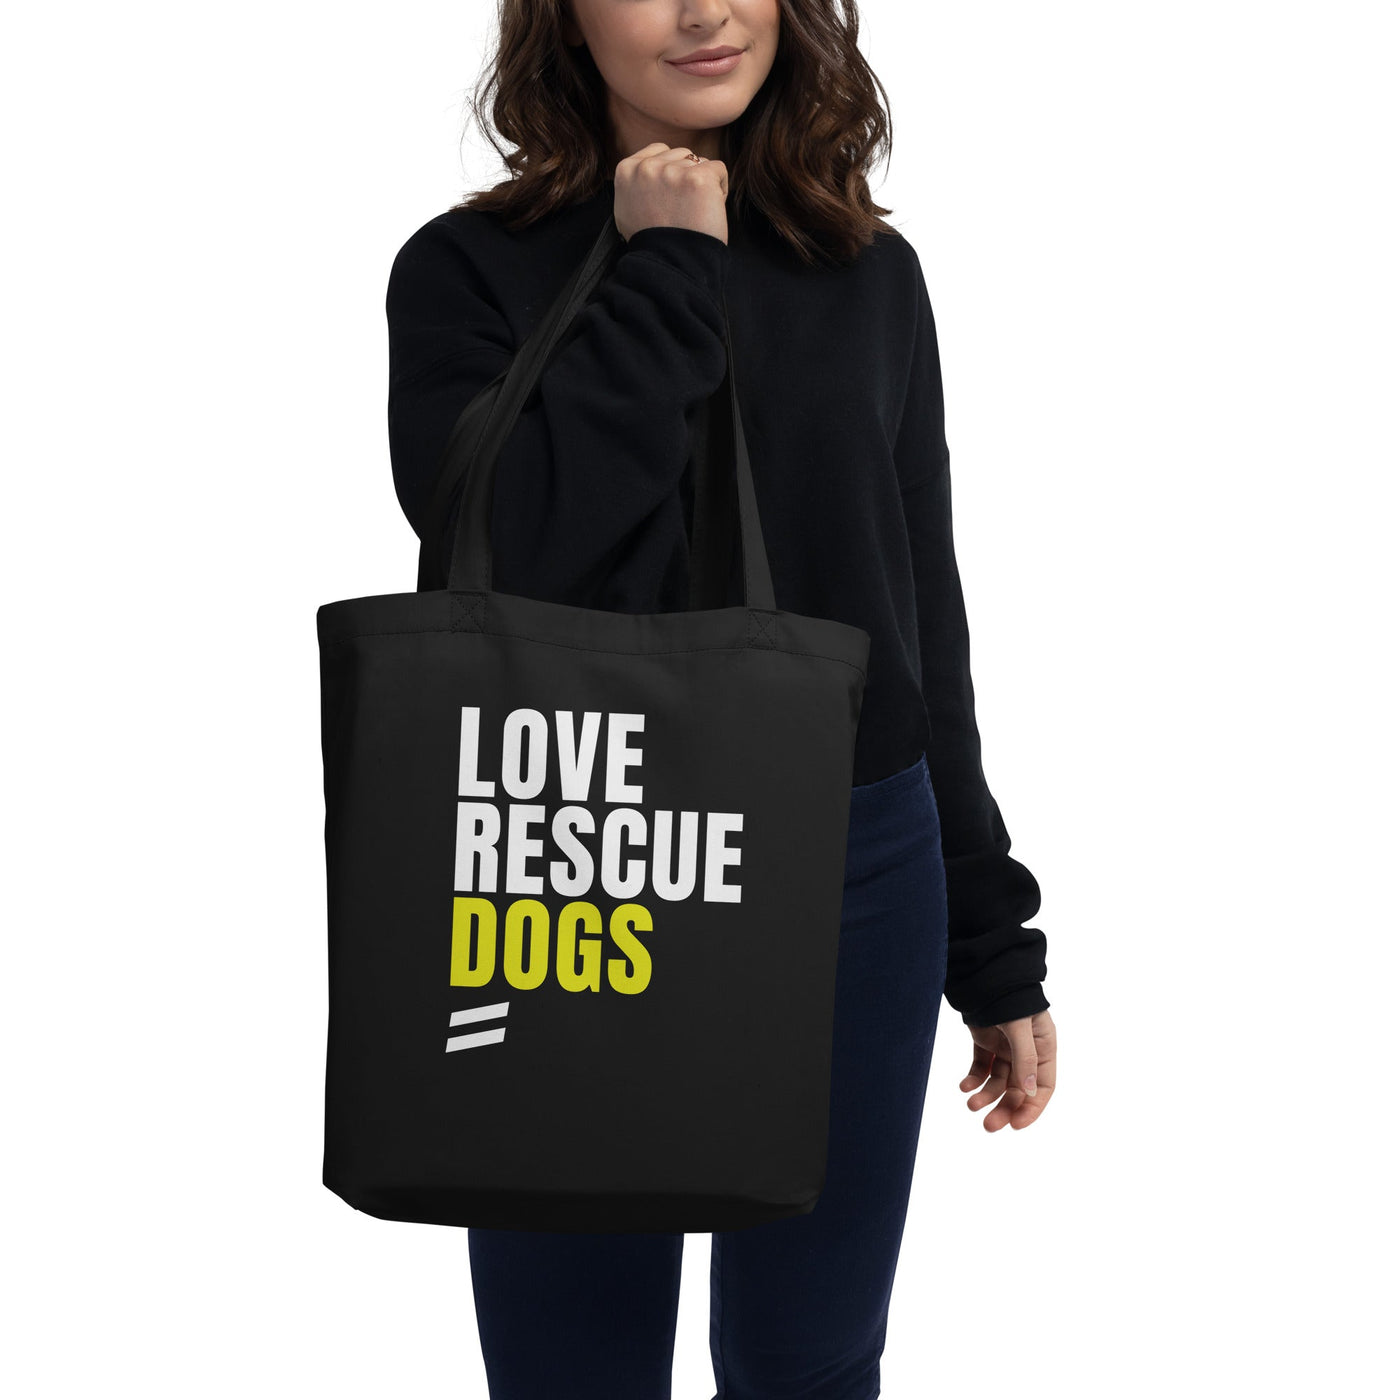 Love Rescue Dogs - Eco Tote Bag Best Life Leashes | The Symbol For Rescue Dogs 